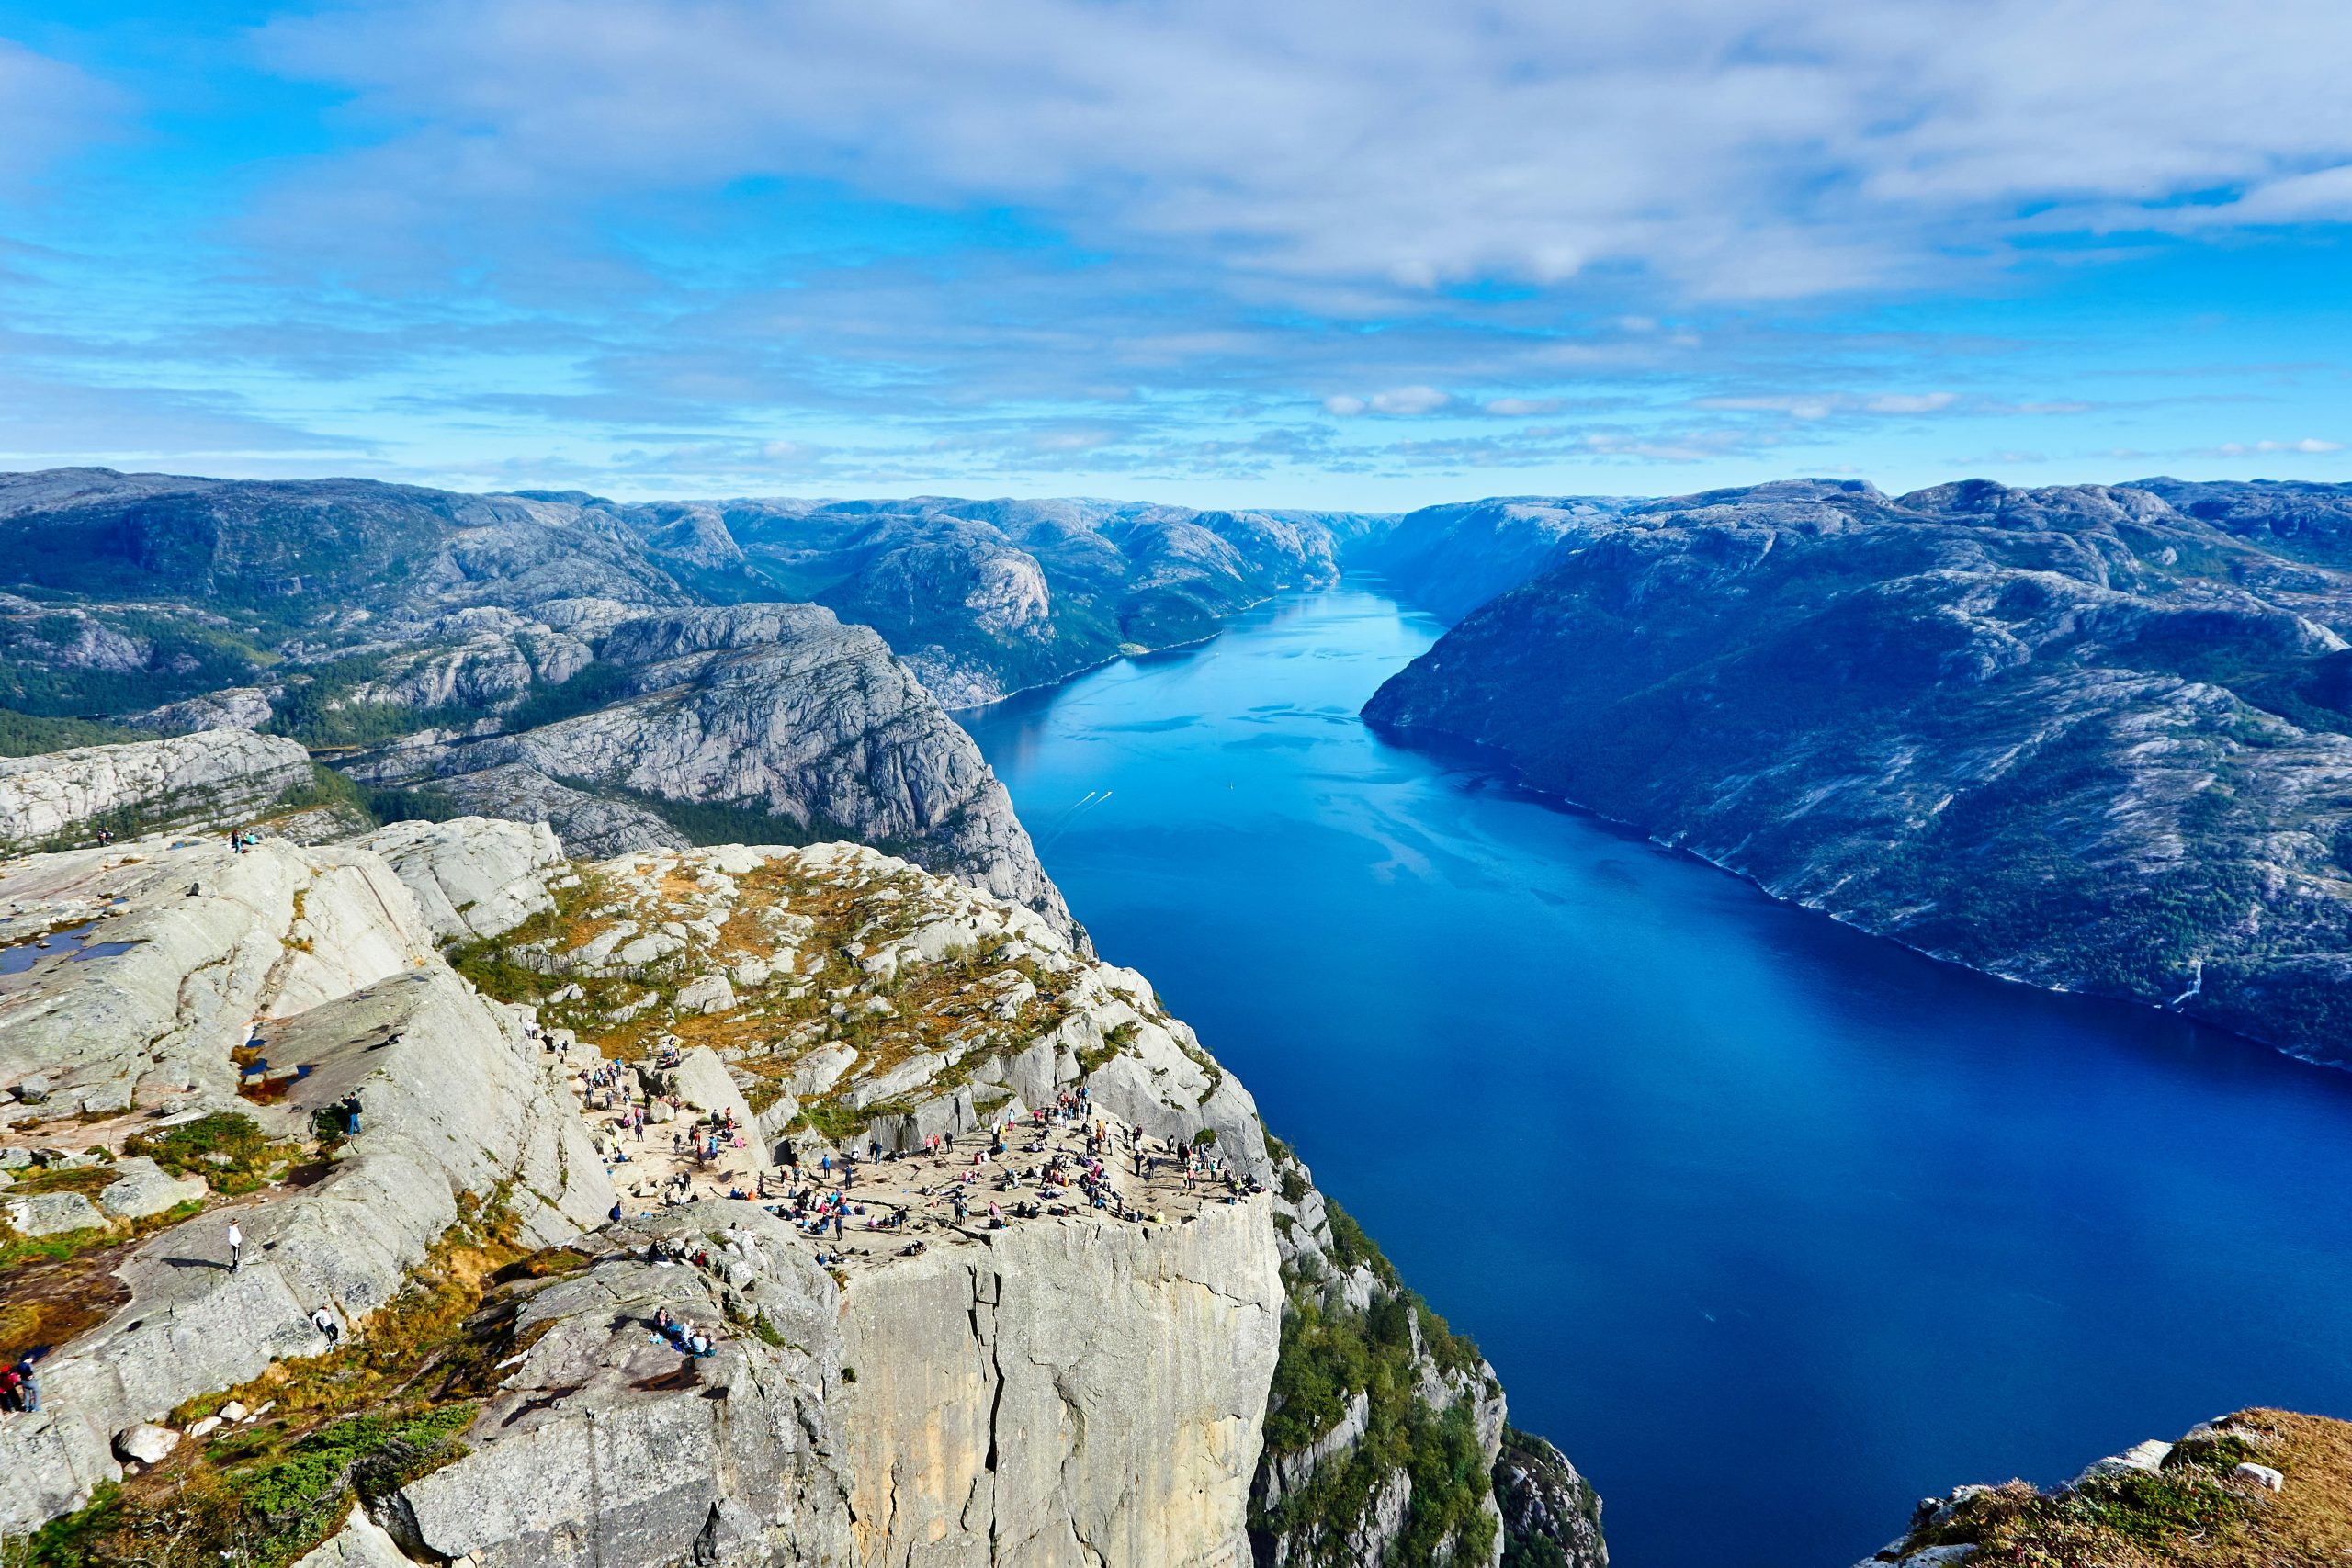 discover the enchanting fjord folklore of norway's majestic landscapes and mythical tales.